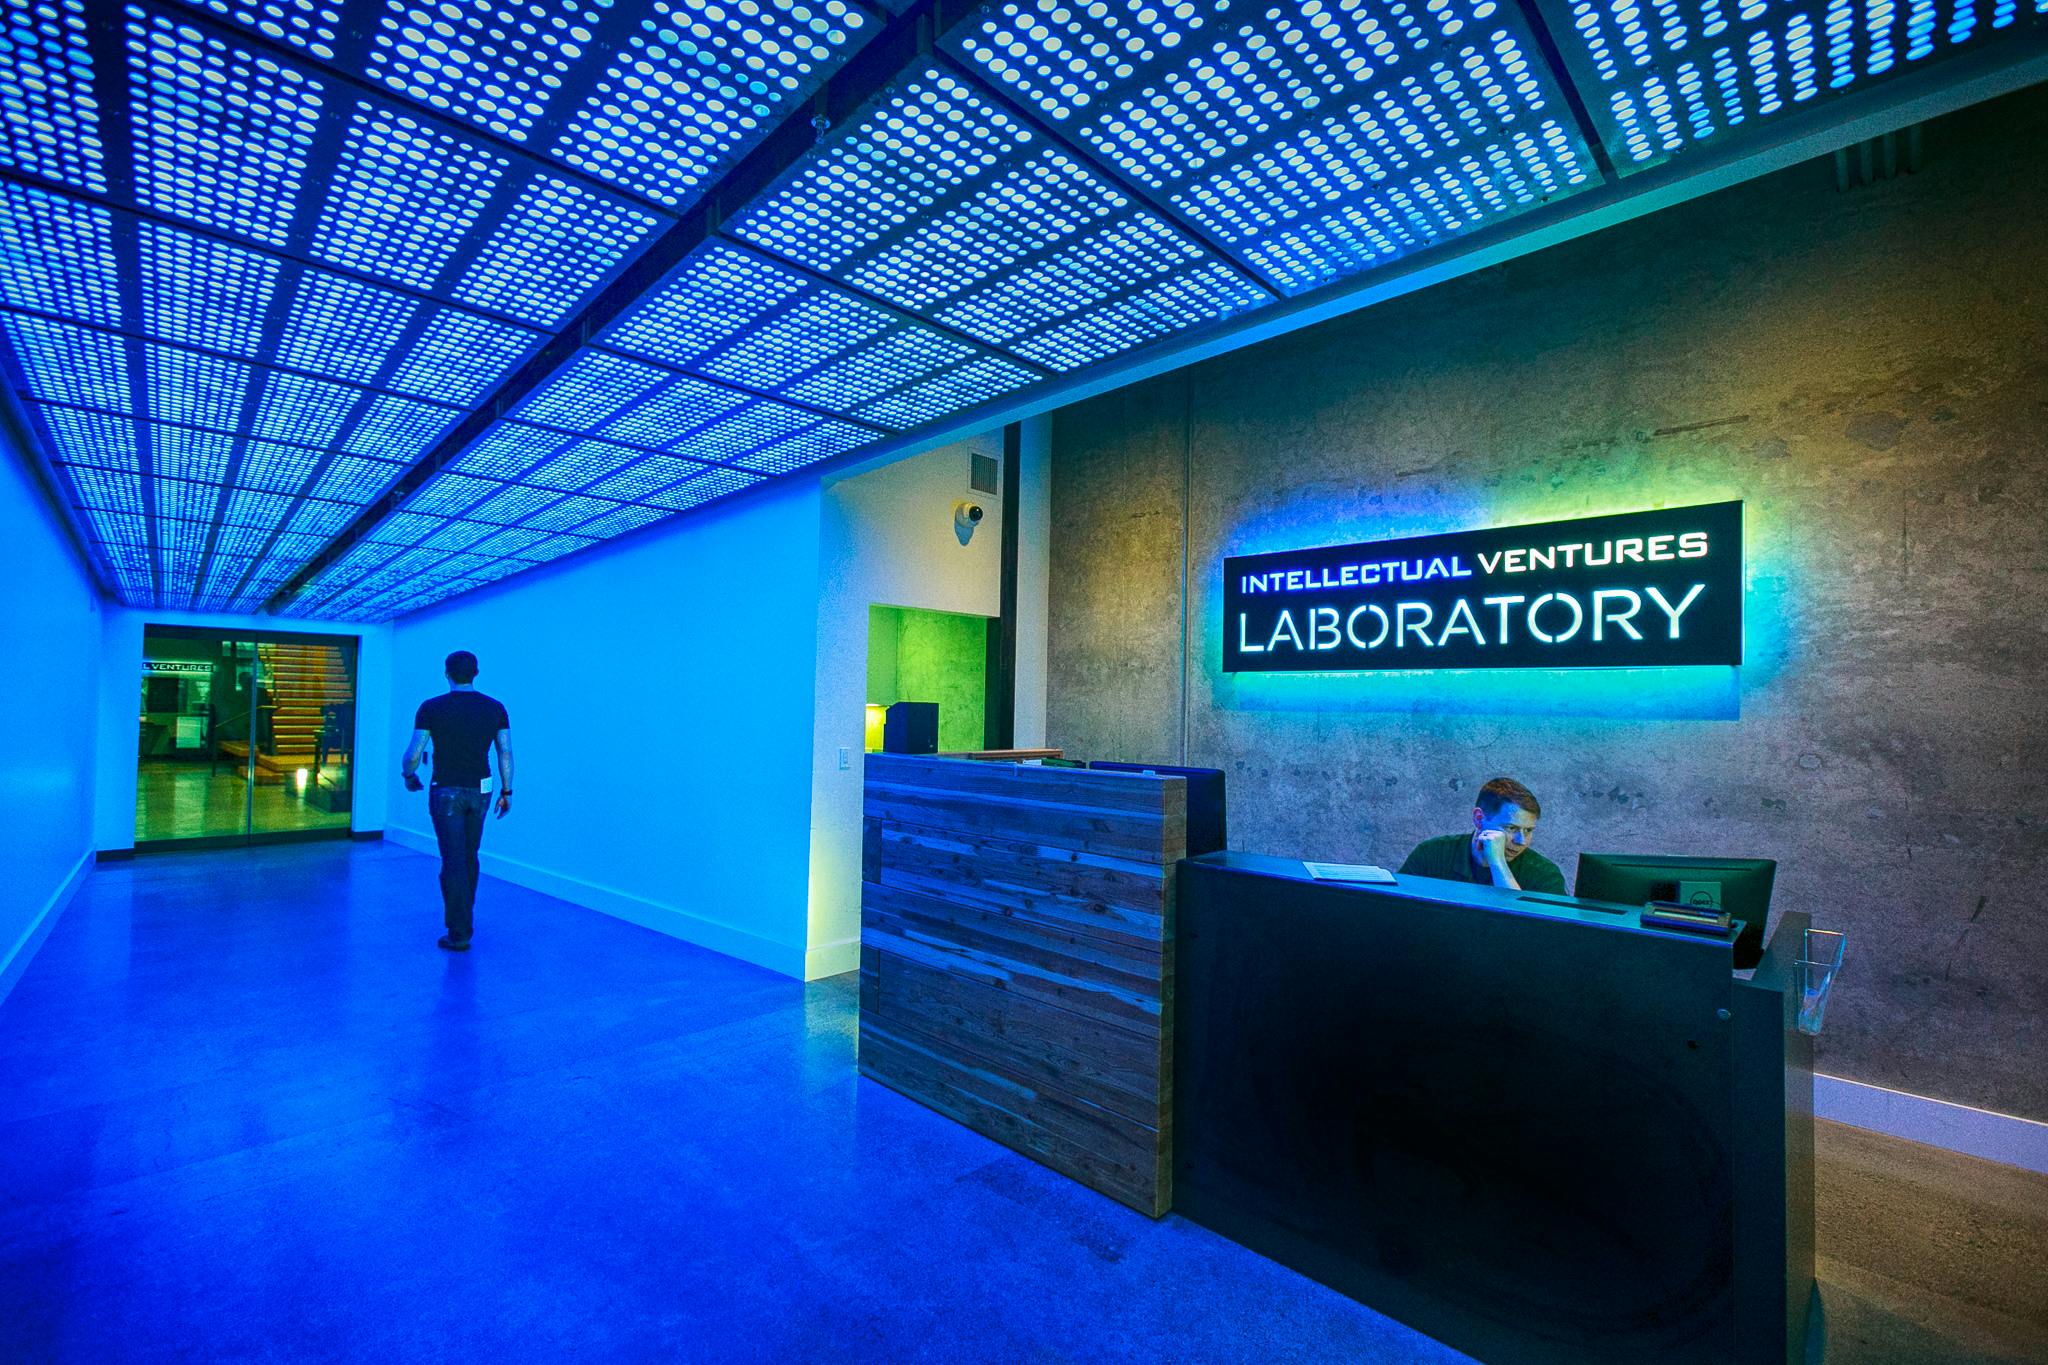 The entrance of Intellectual Ventures. The ceiling is a grid of dots, projecting blue light. 